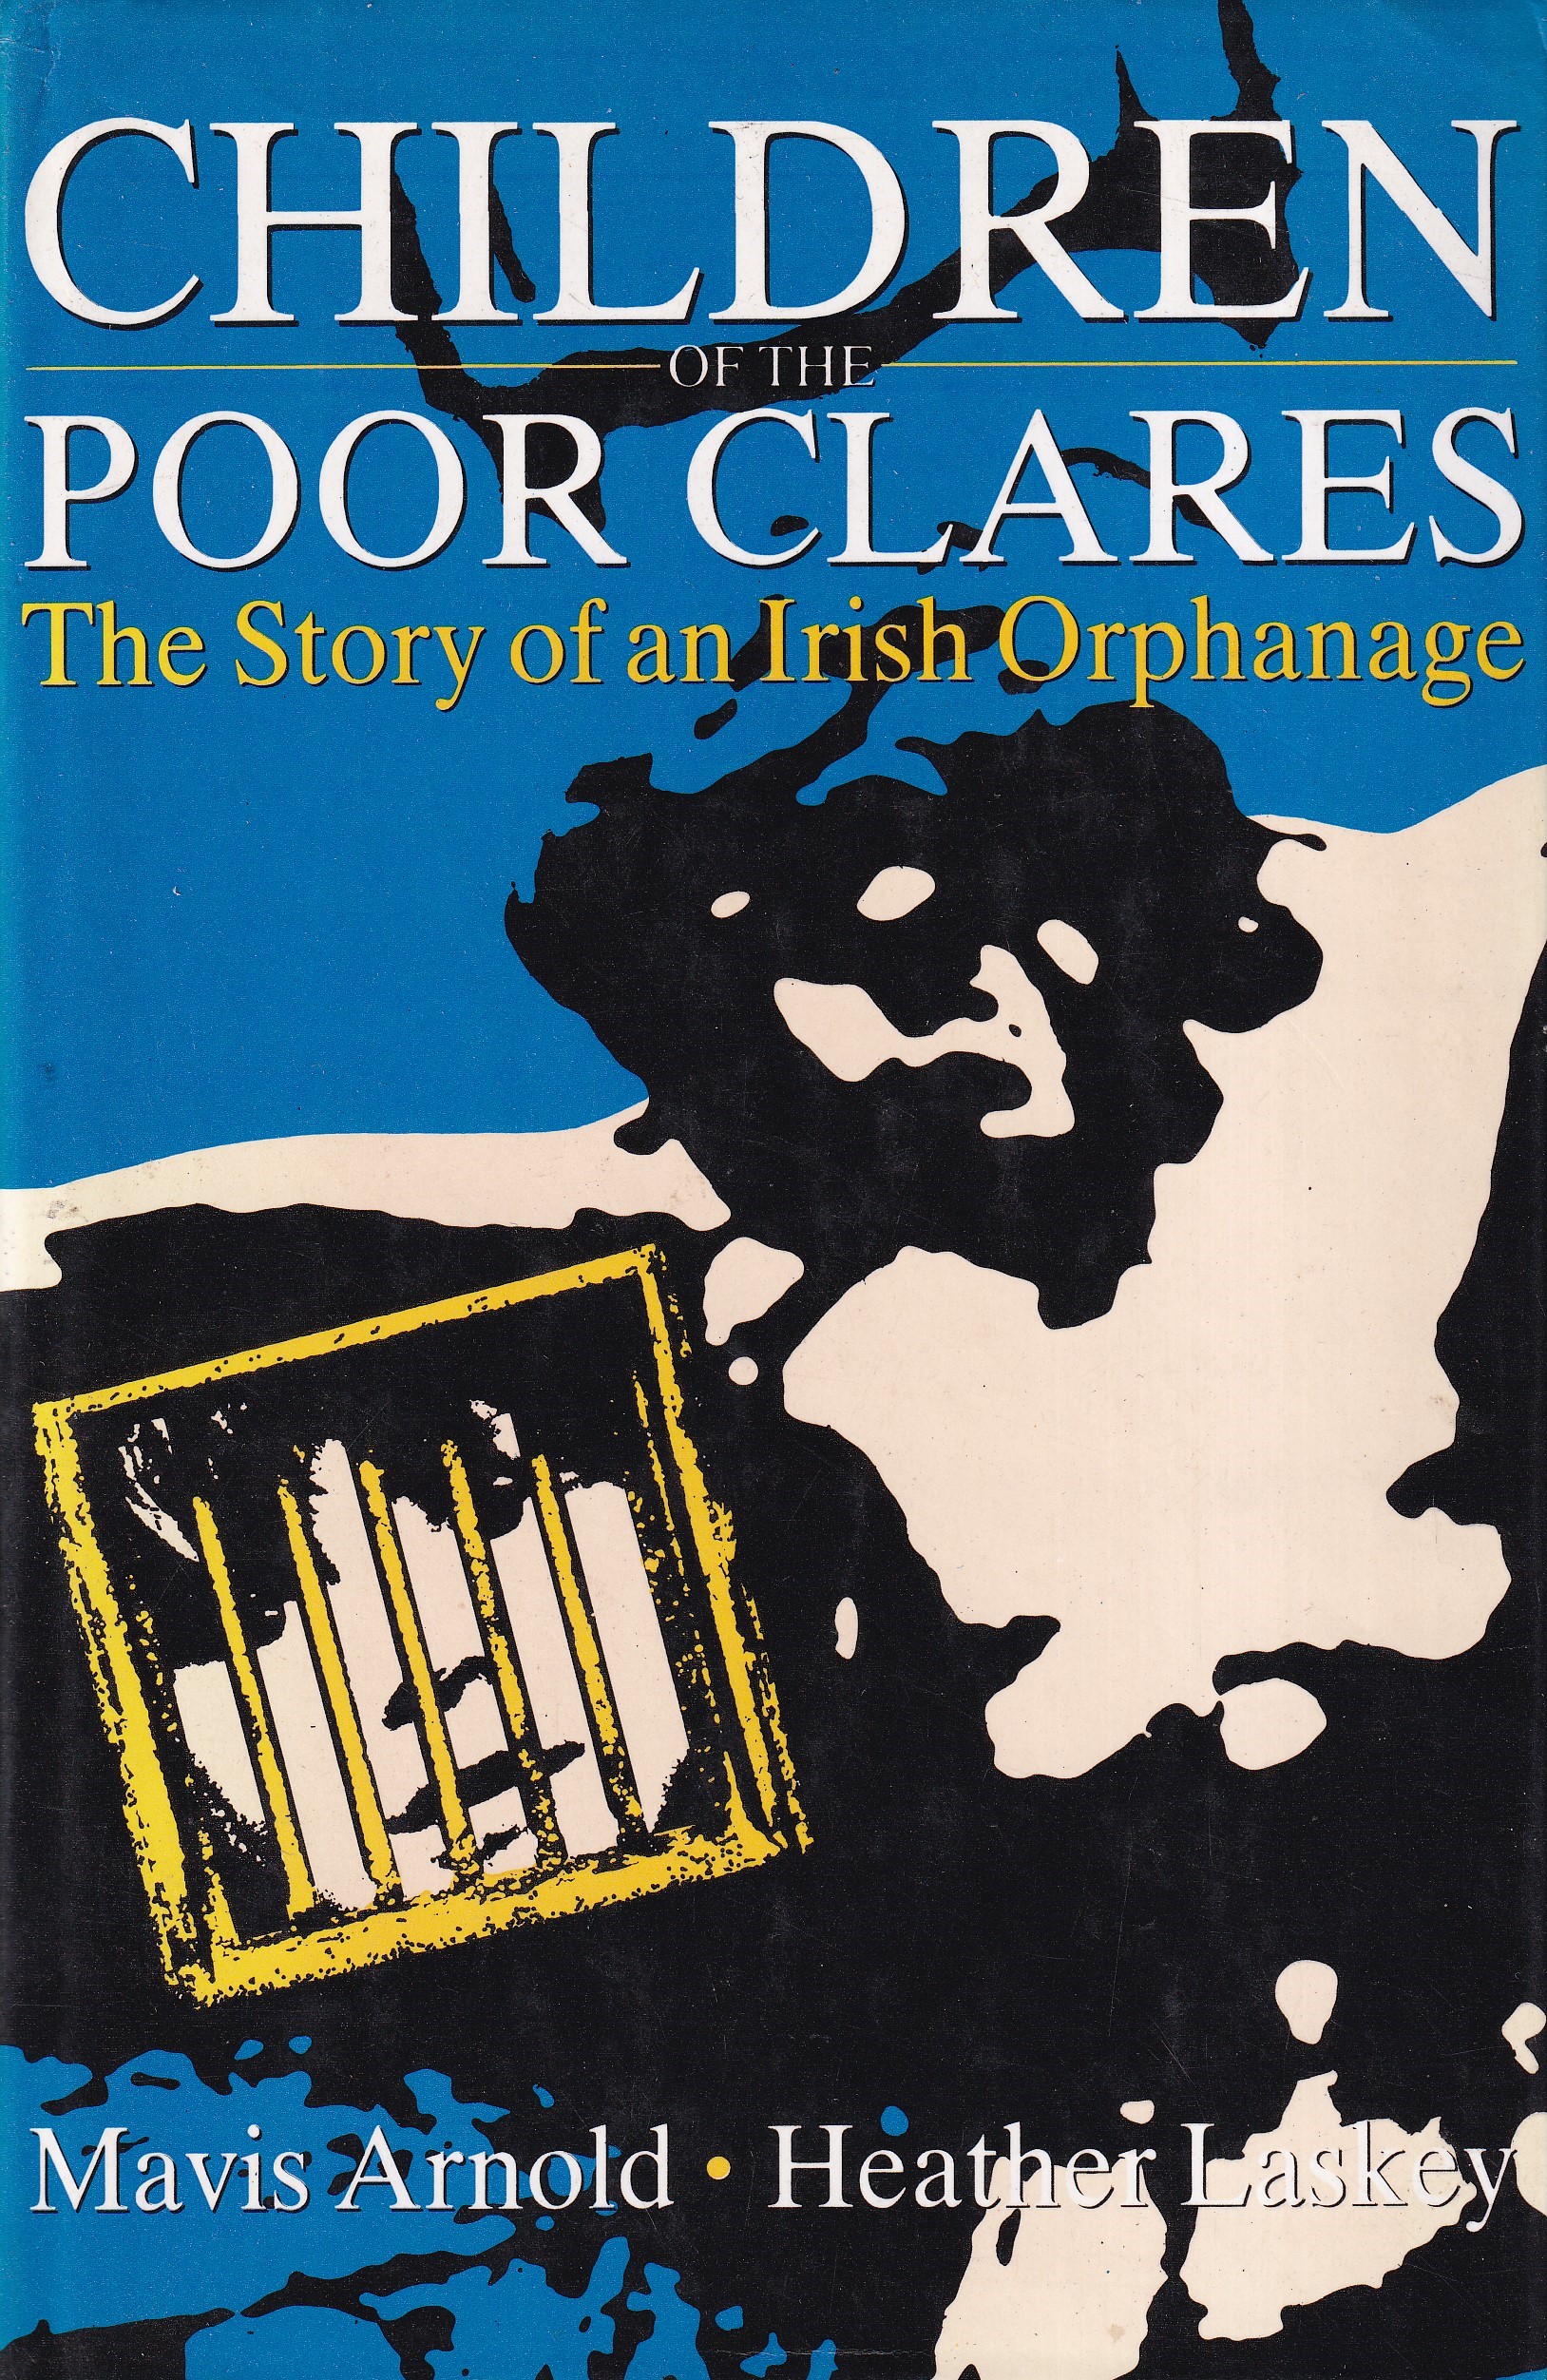 Children of the Poor Clare’s: The Story of an Irish Orphanage | Mavis Arnold and Heather Laskey | Charlie Byrne's